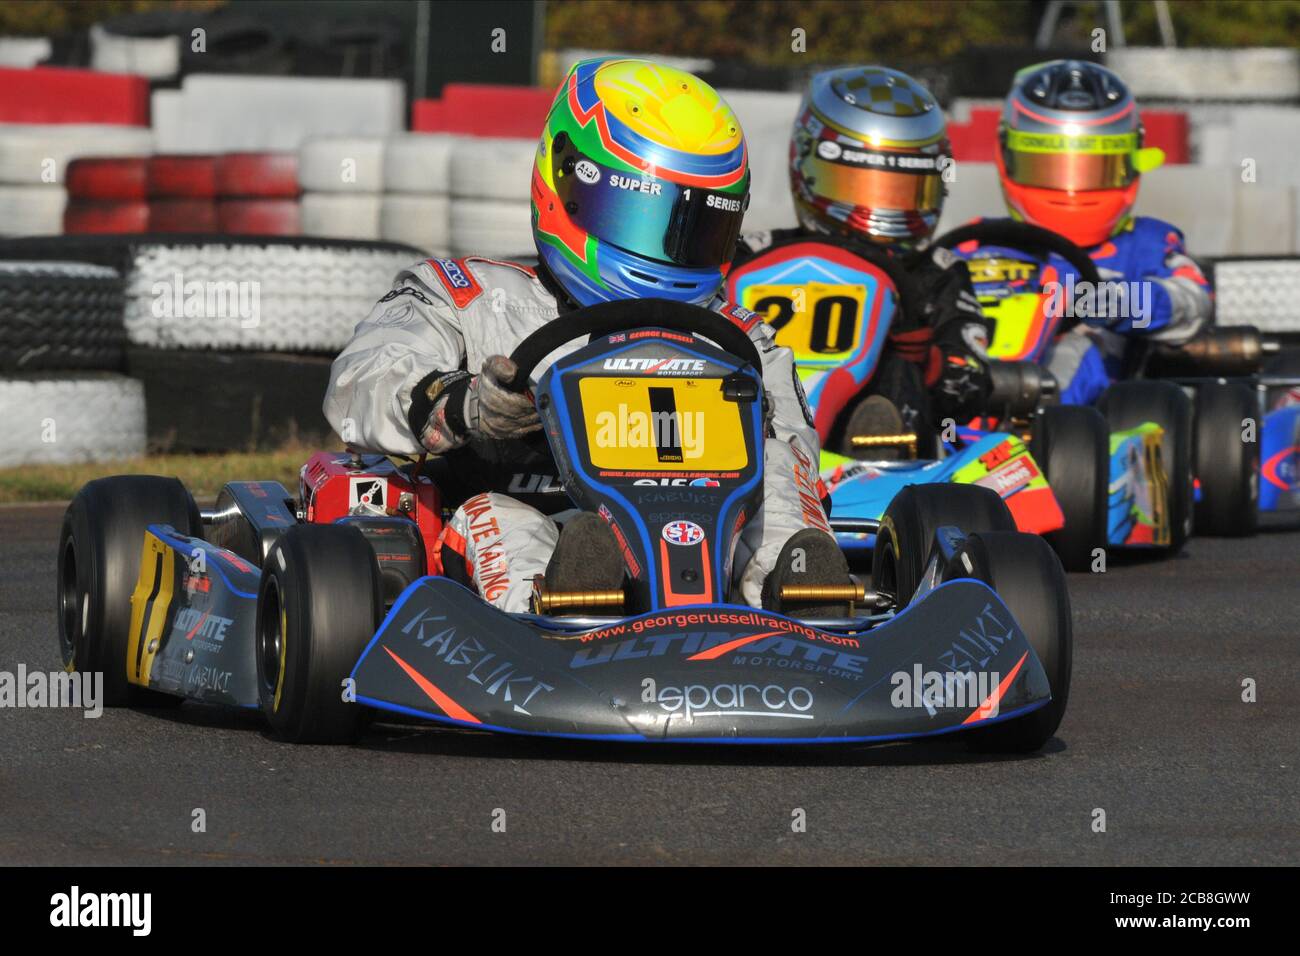 Williams F1 driver George Russell in his early Cadet Karting career. Stock Photo